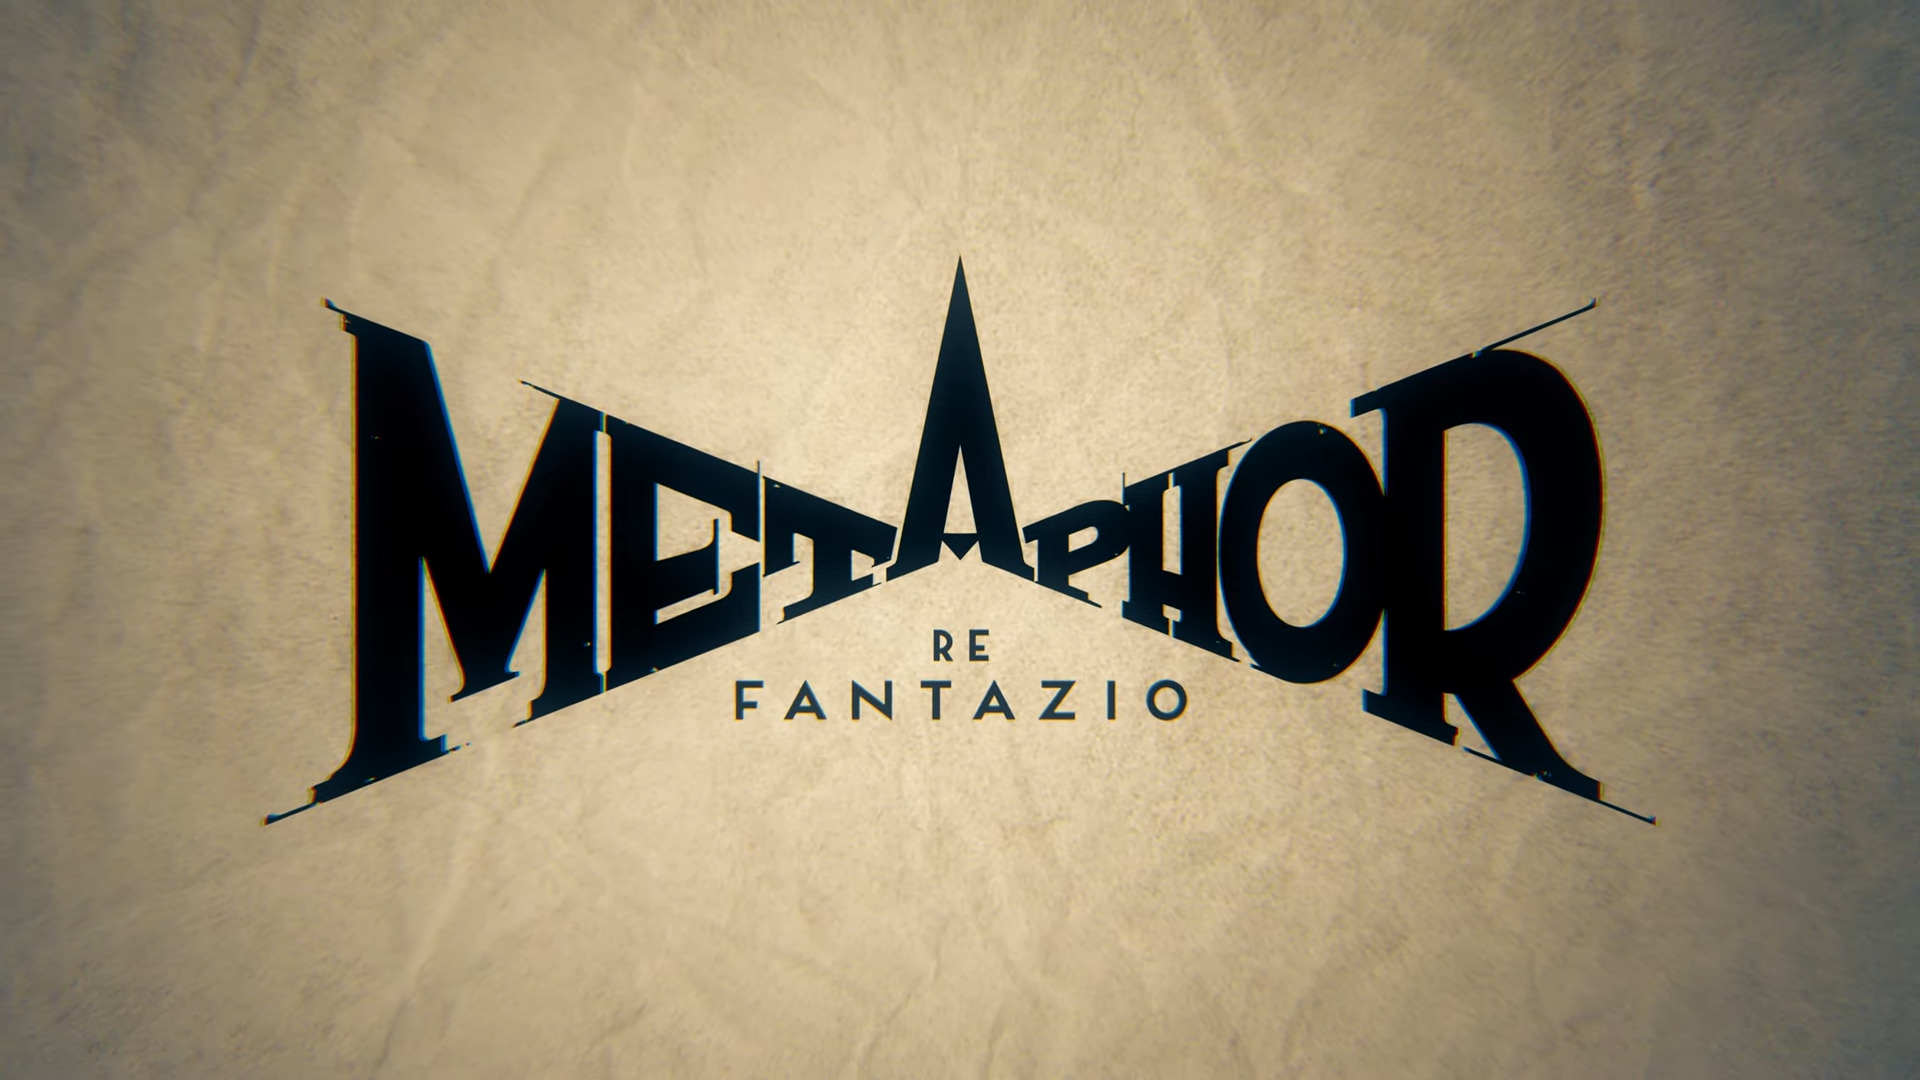 Project Re Fantasy Officially Titled Metaphor: ReFantazio, Releasing in 2024